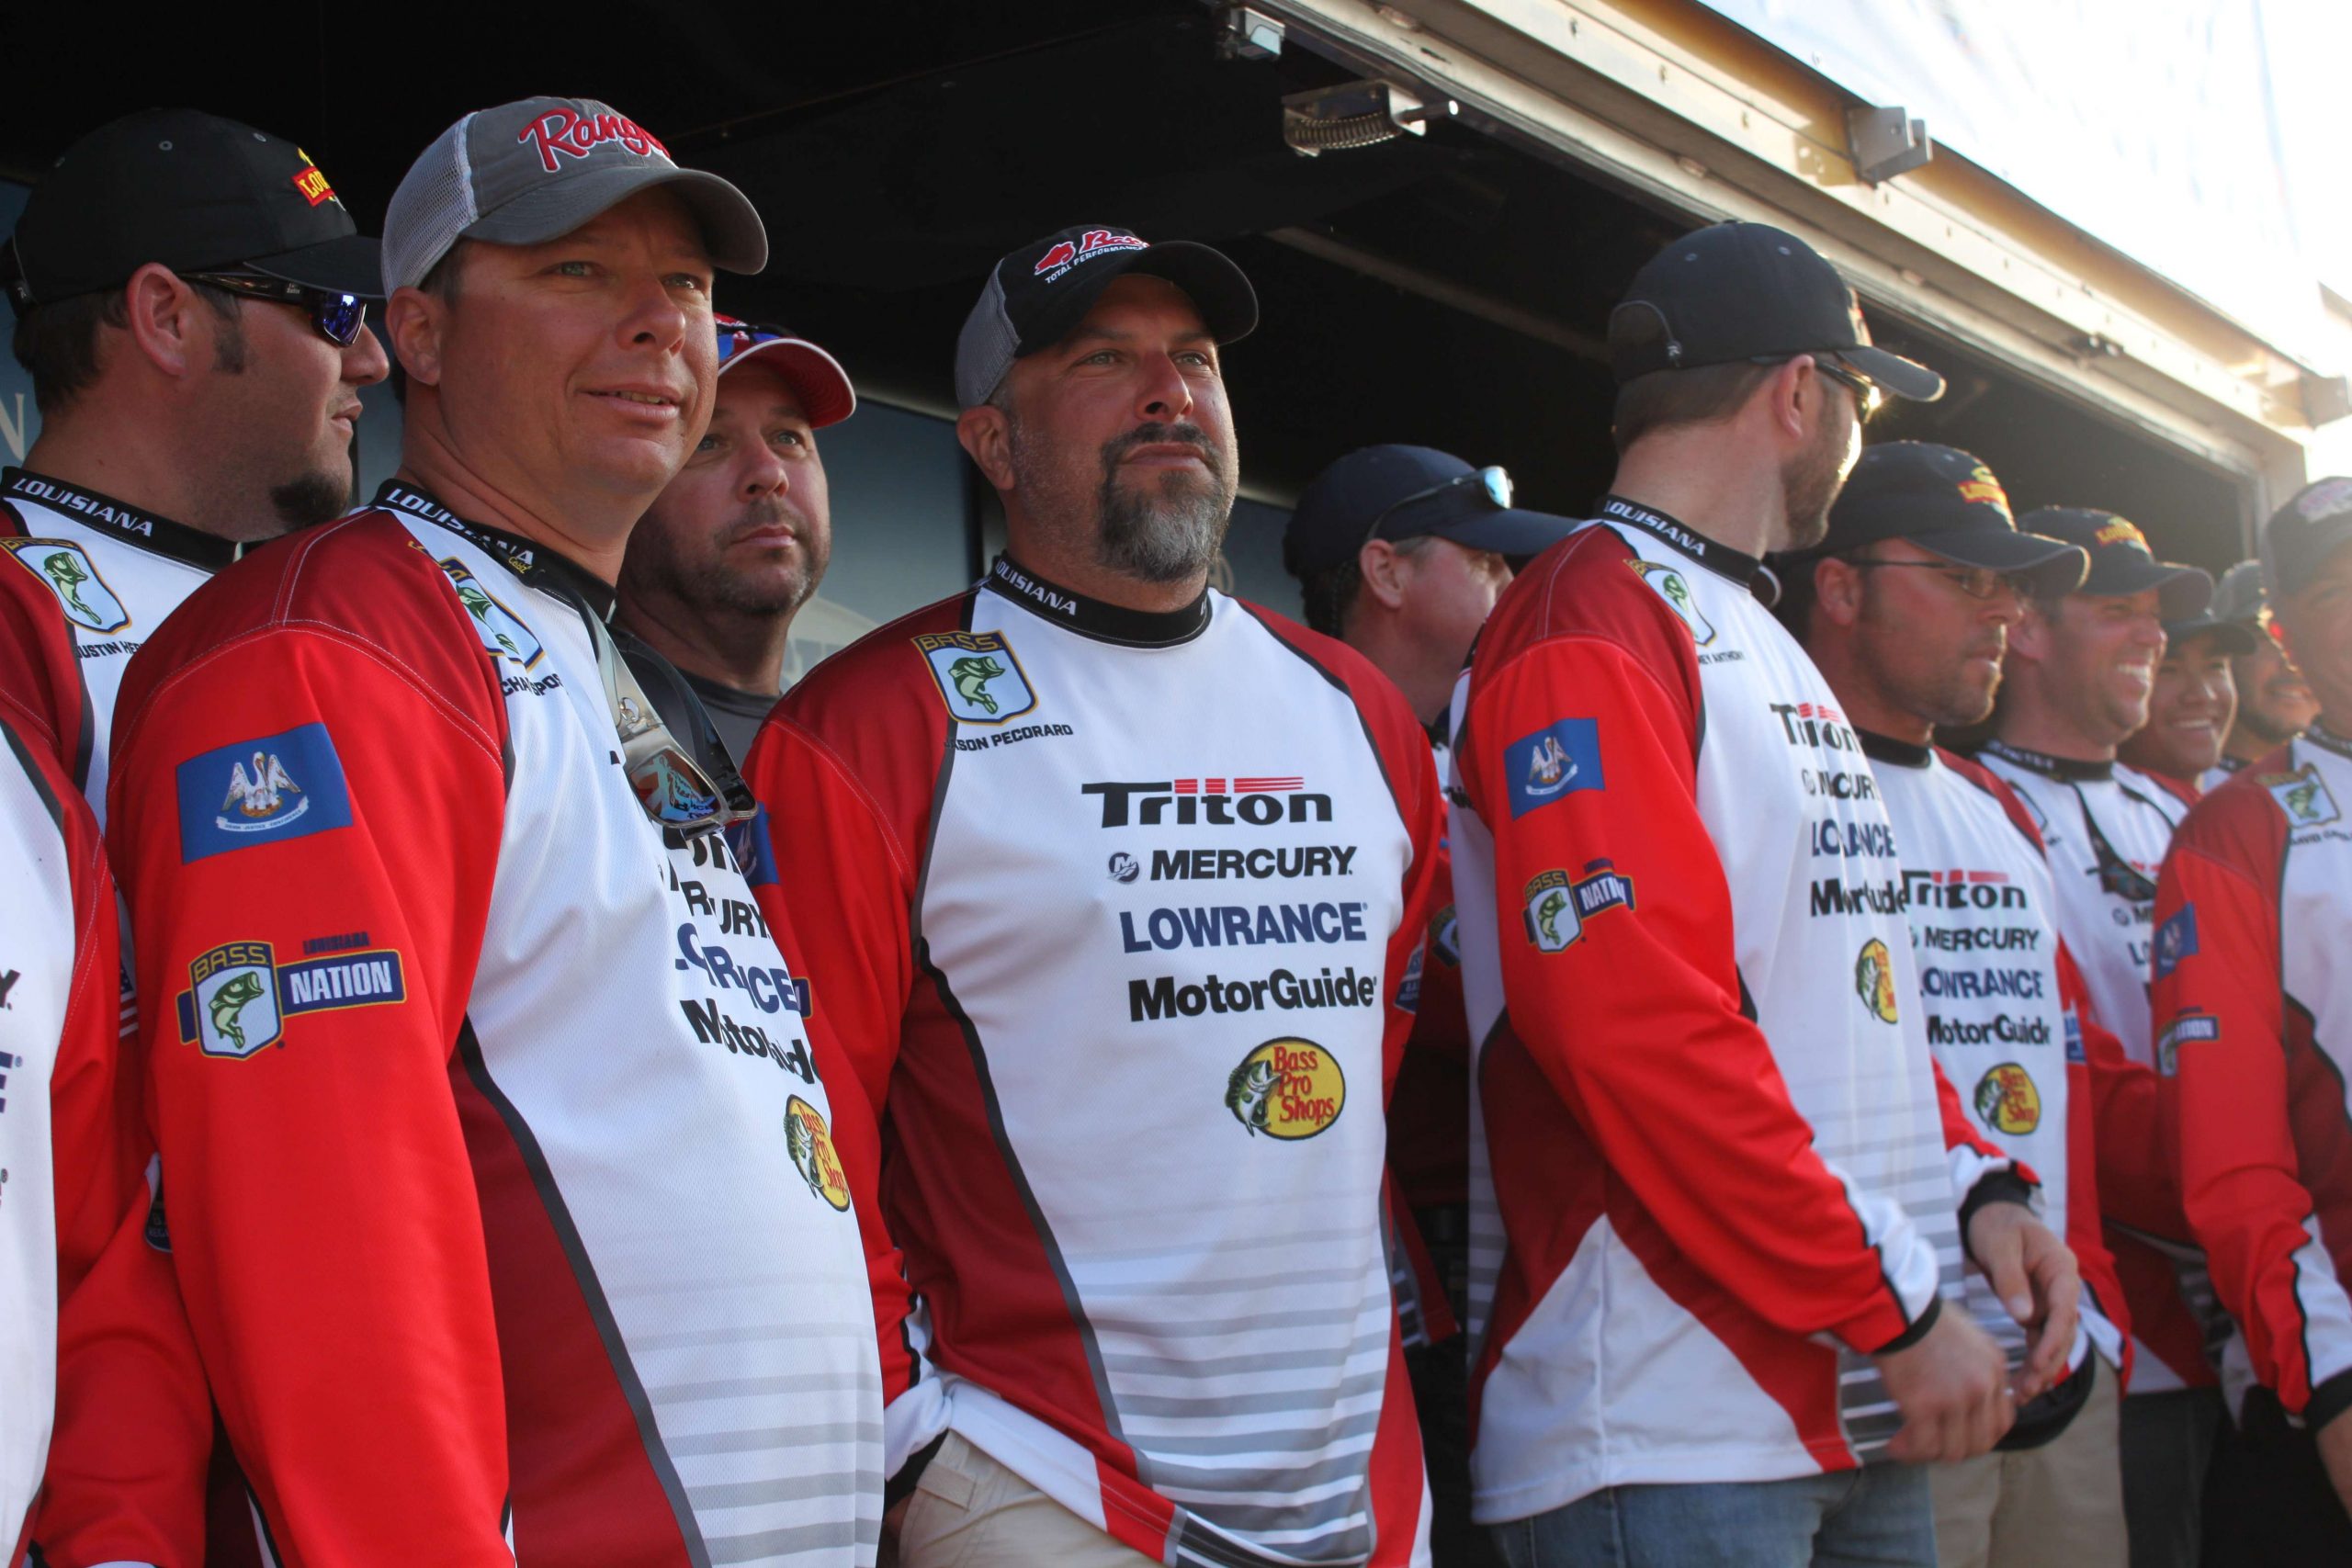 And then each member of Team Louisiana was called to the stage to receive plaques to commemorate their victory. The team's cumulative effort (135 bass totaling 379 pounds, 2 ounces) led the field. Nine Louisiana anglers survived to fish Friday when the top boater and non-boater from each of the 19 states represented here will lock up a spot in the B.A.S.S. Nation Championship later this year.
